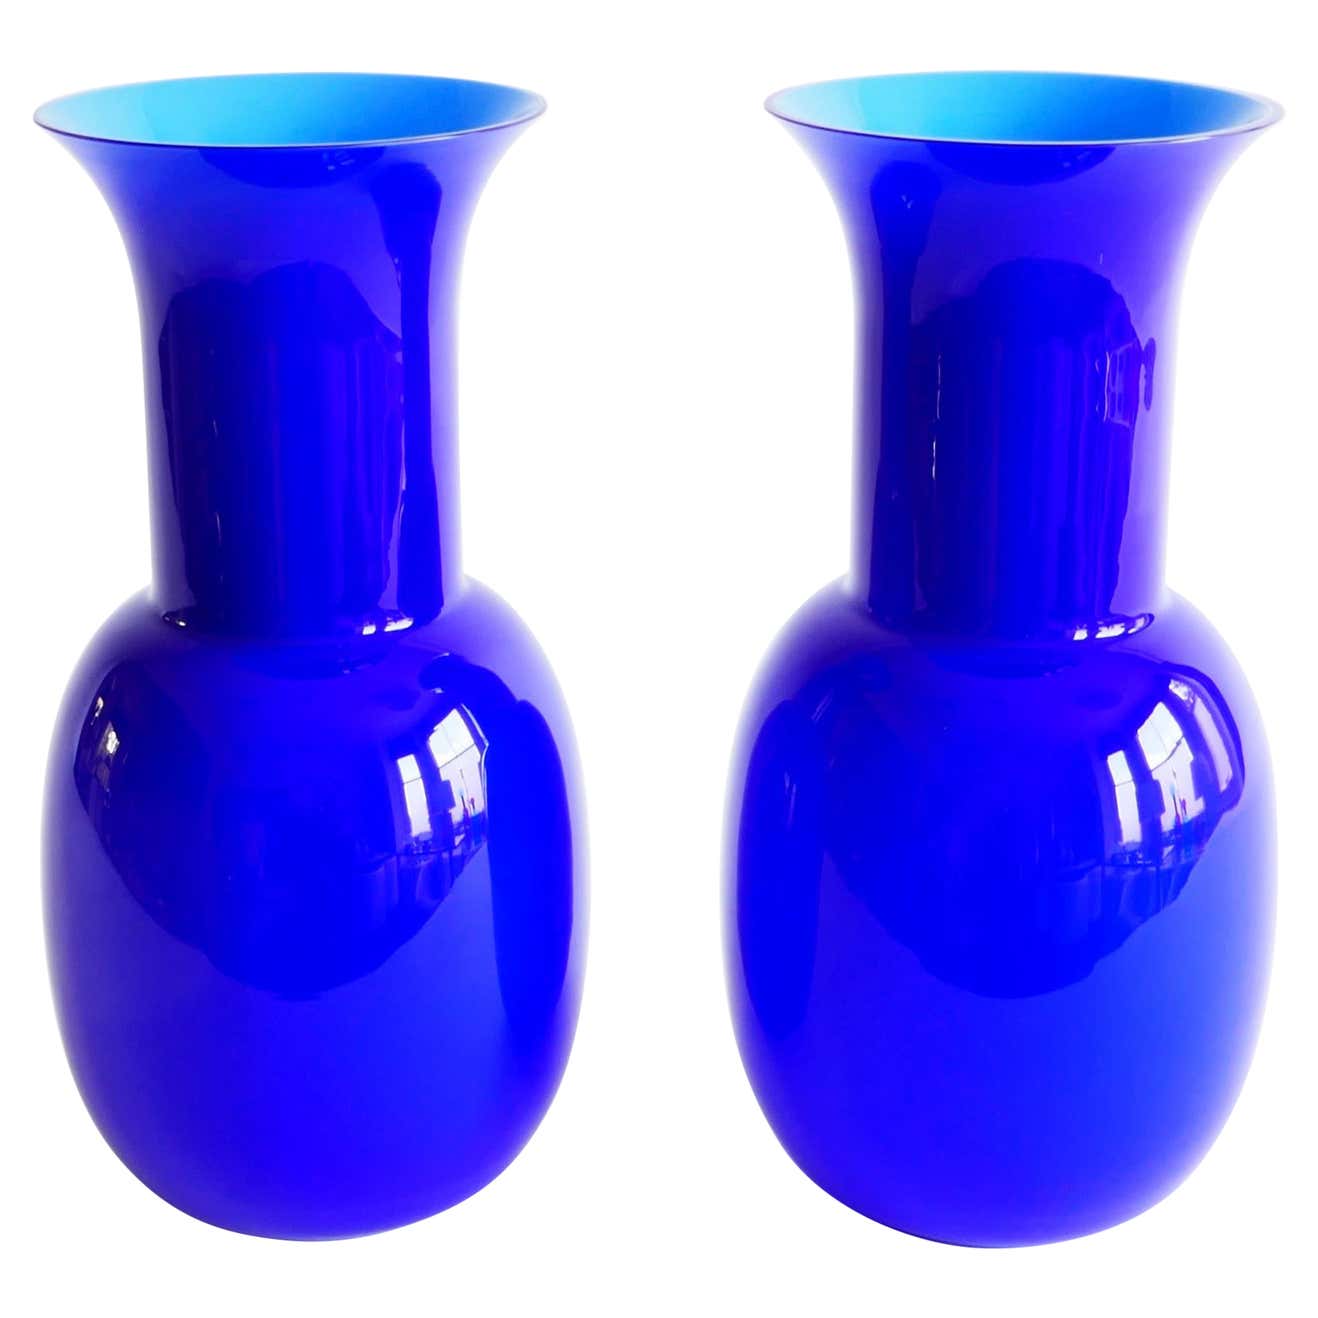 Sold - Pair of Blue Murano Glass Vase by Aureliano Toso, 2000, Italy